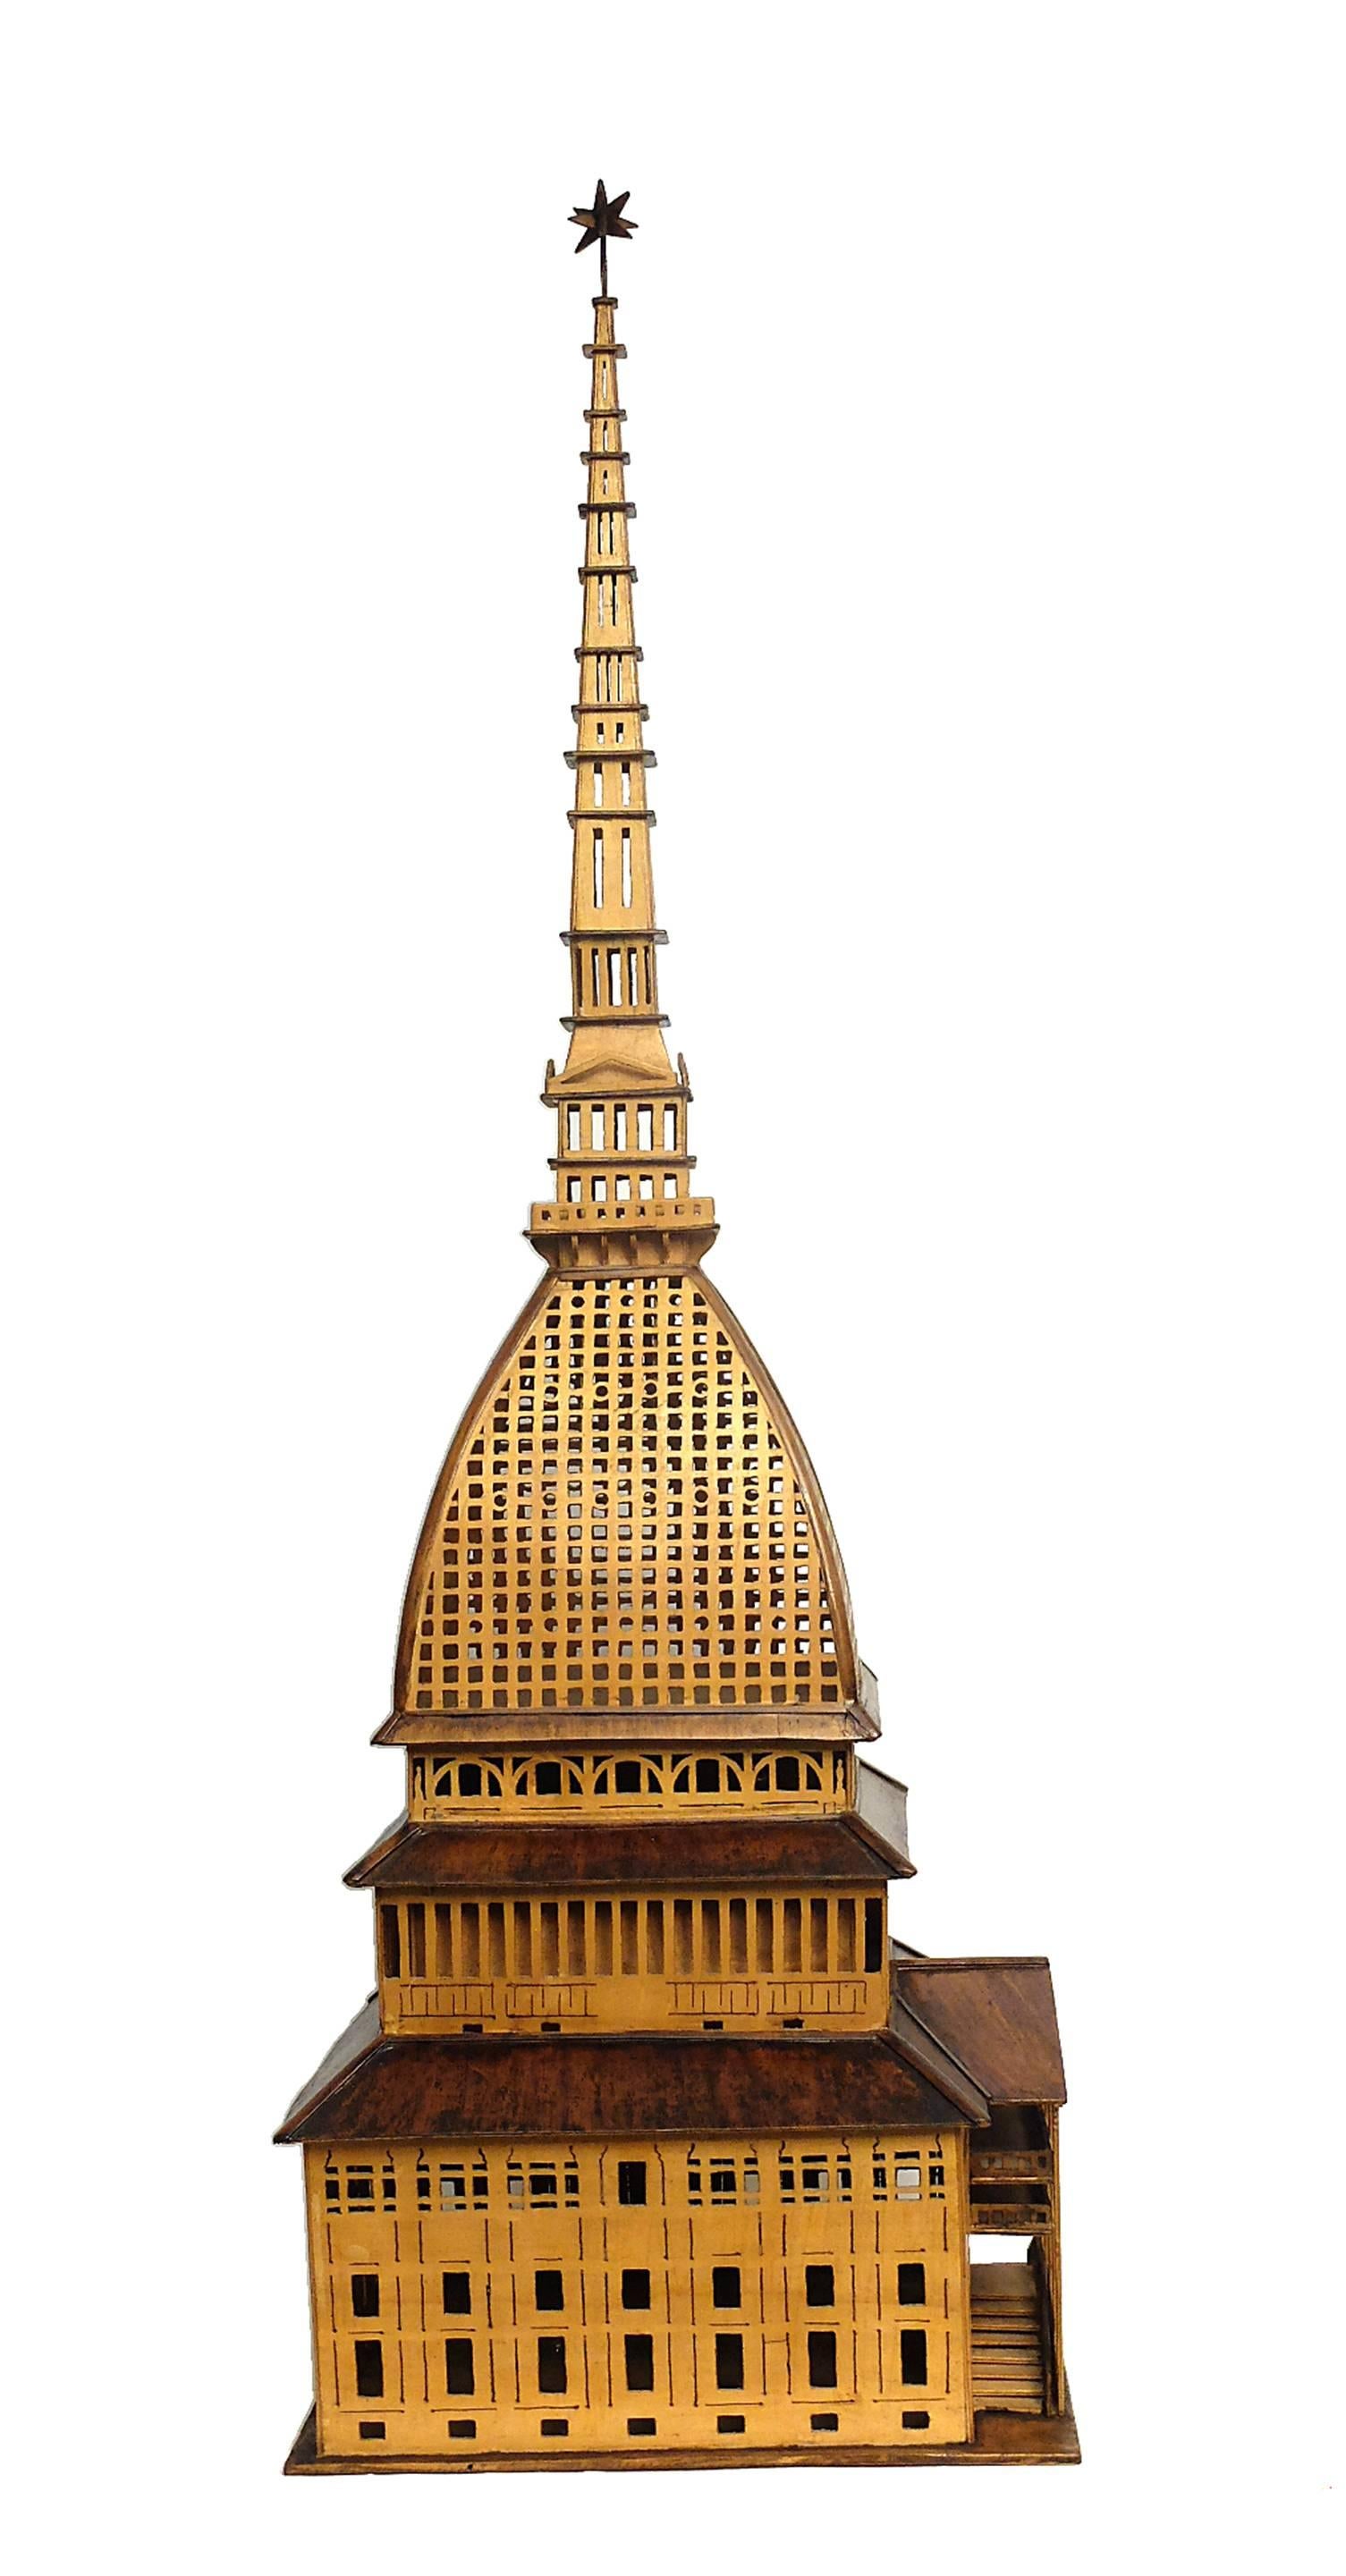 Early 20th Century Wooden Architectural Maquette of the Mole Antonelliana in Turin, Italy, 1900